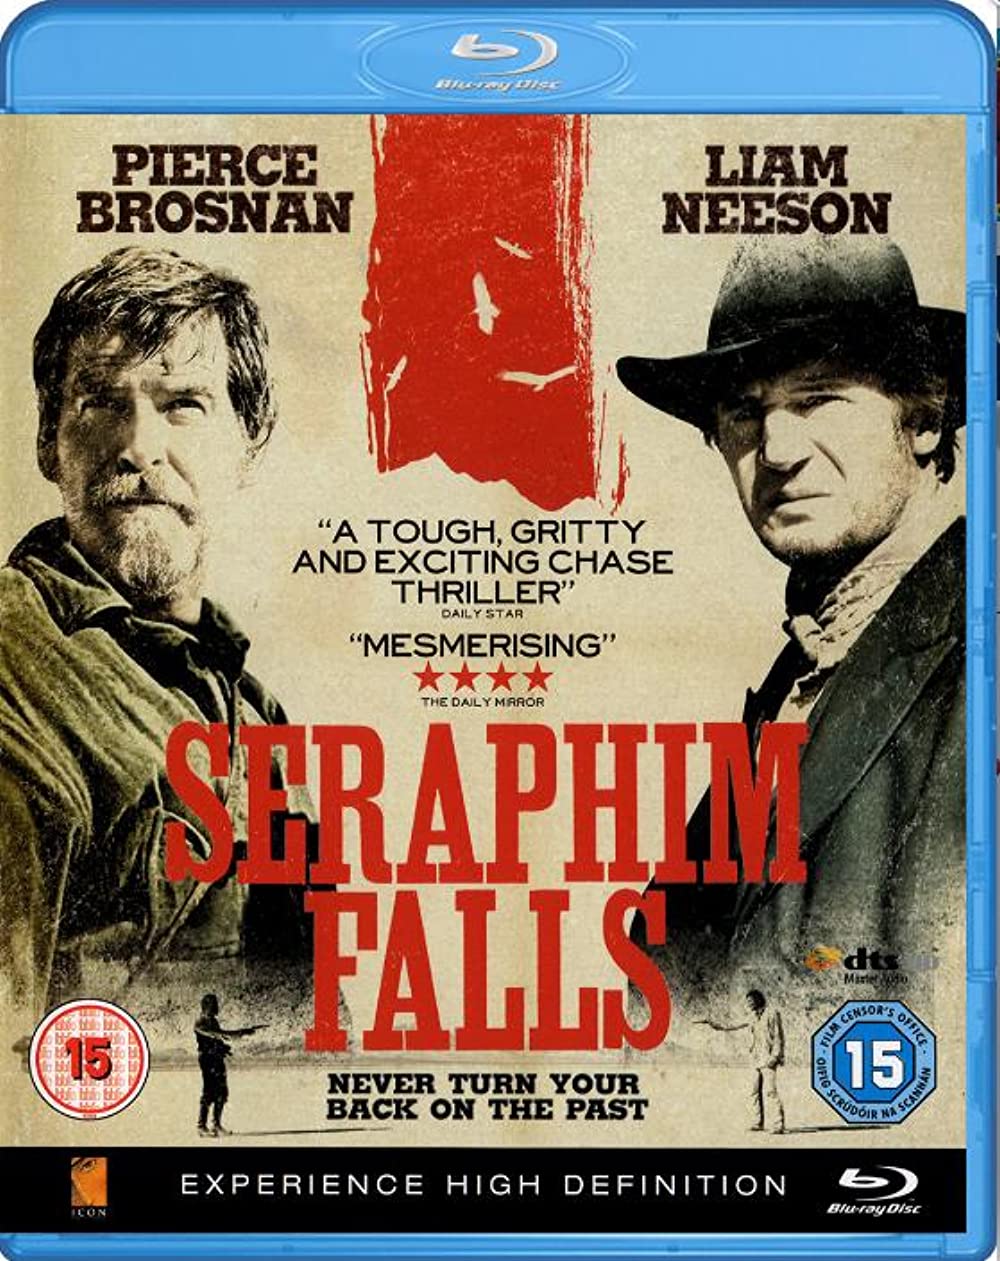 Download Behind the Scenes of 'Seraphim Falls' Movie | Download Behind The Scenes Of 'seraphim Falls' Dvd